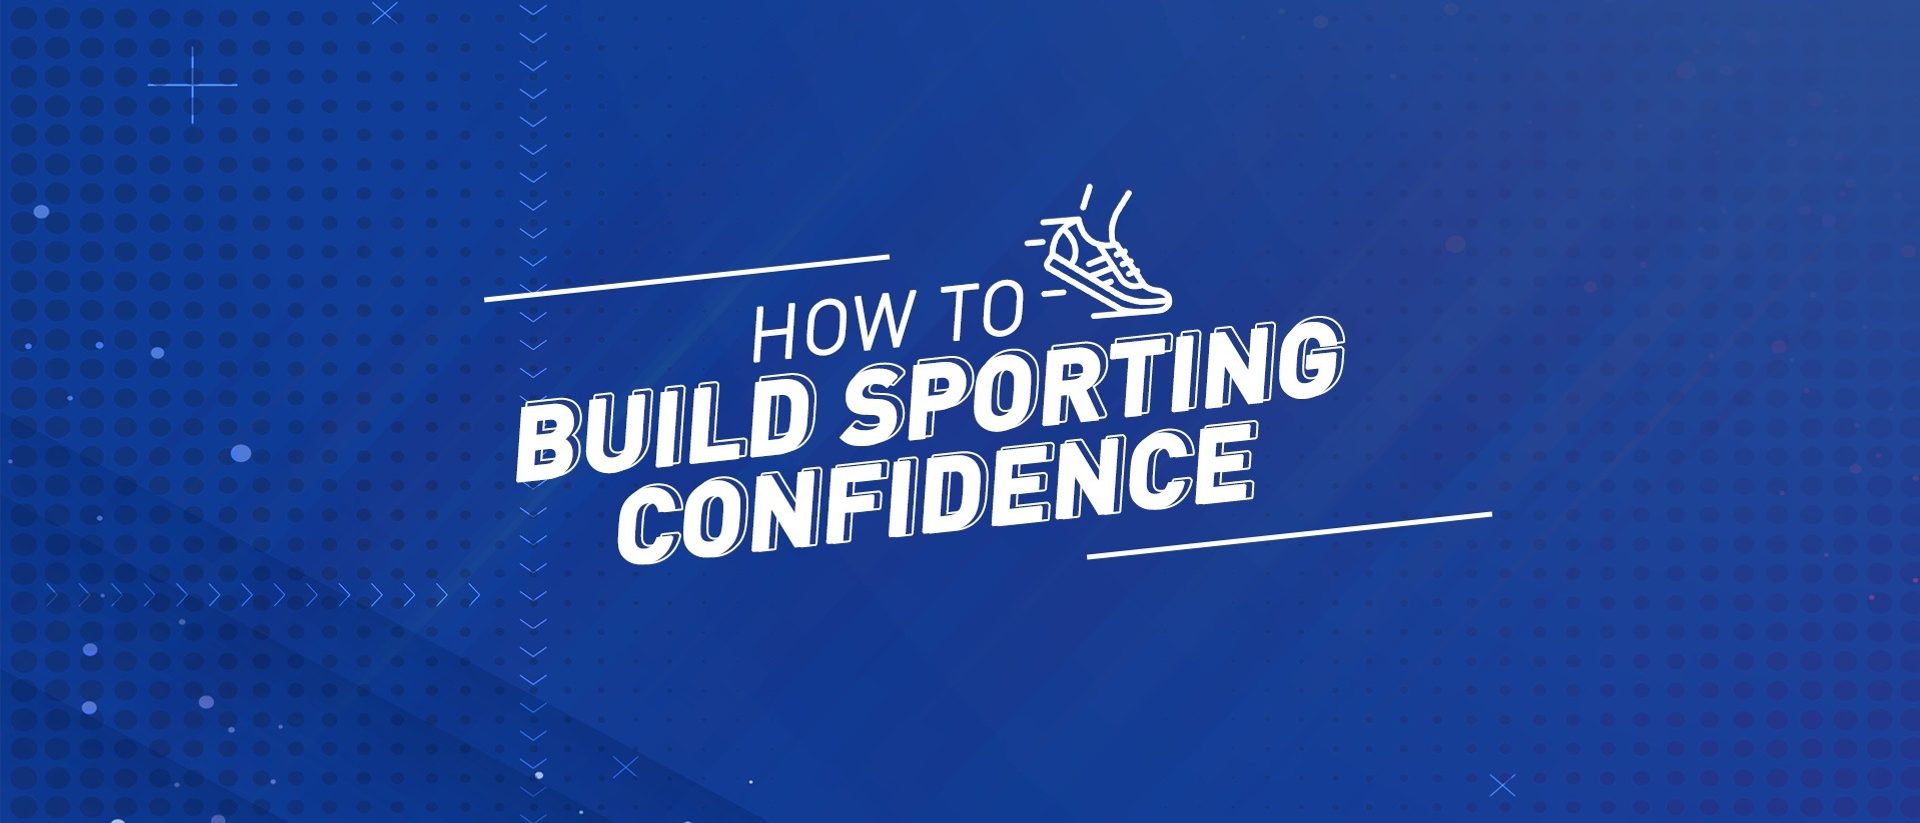 Building Sporting Confidence